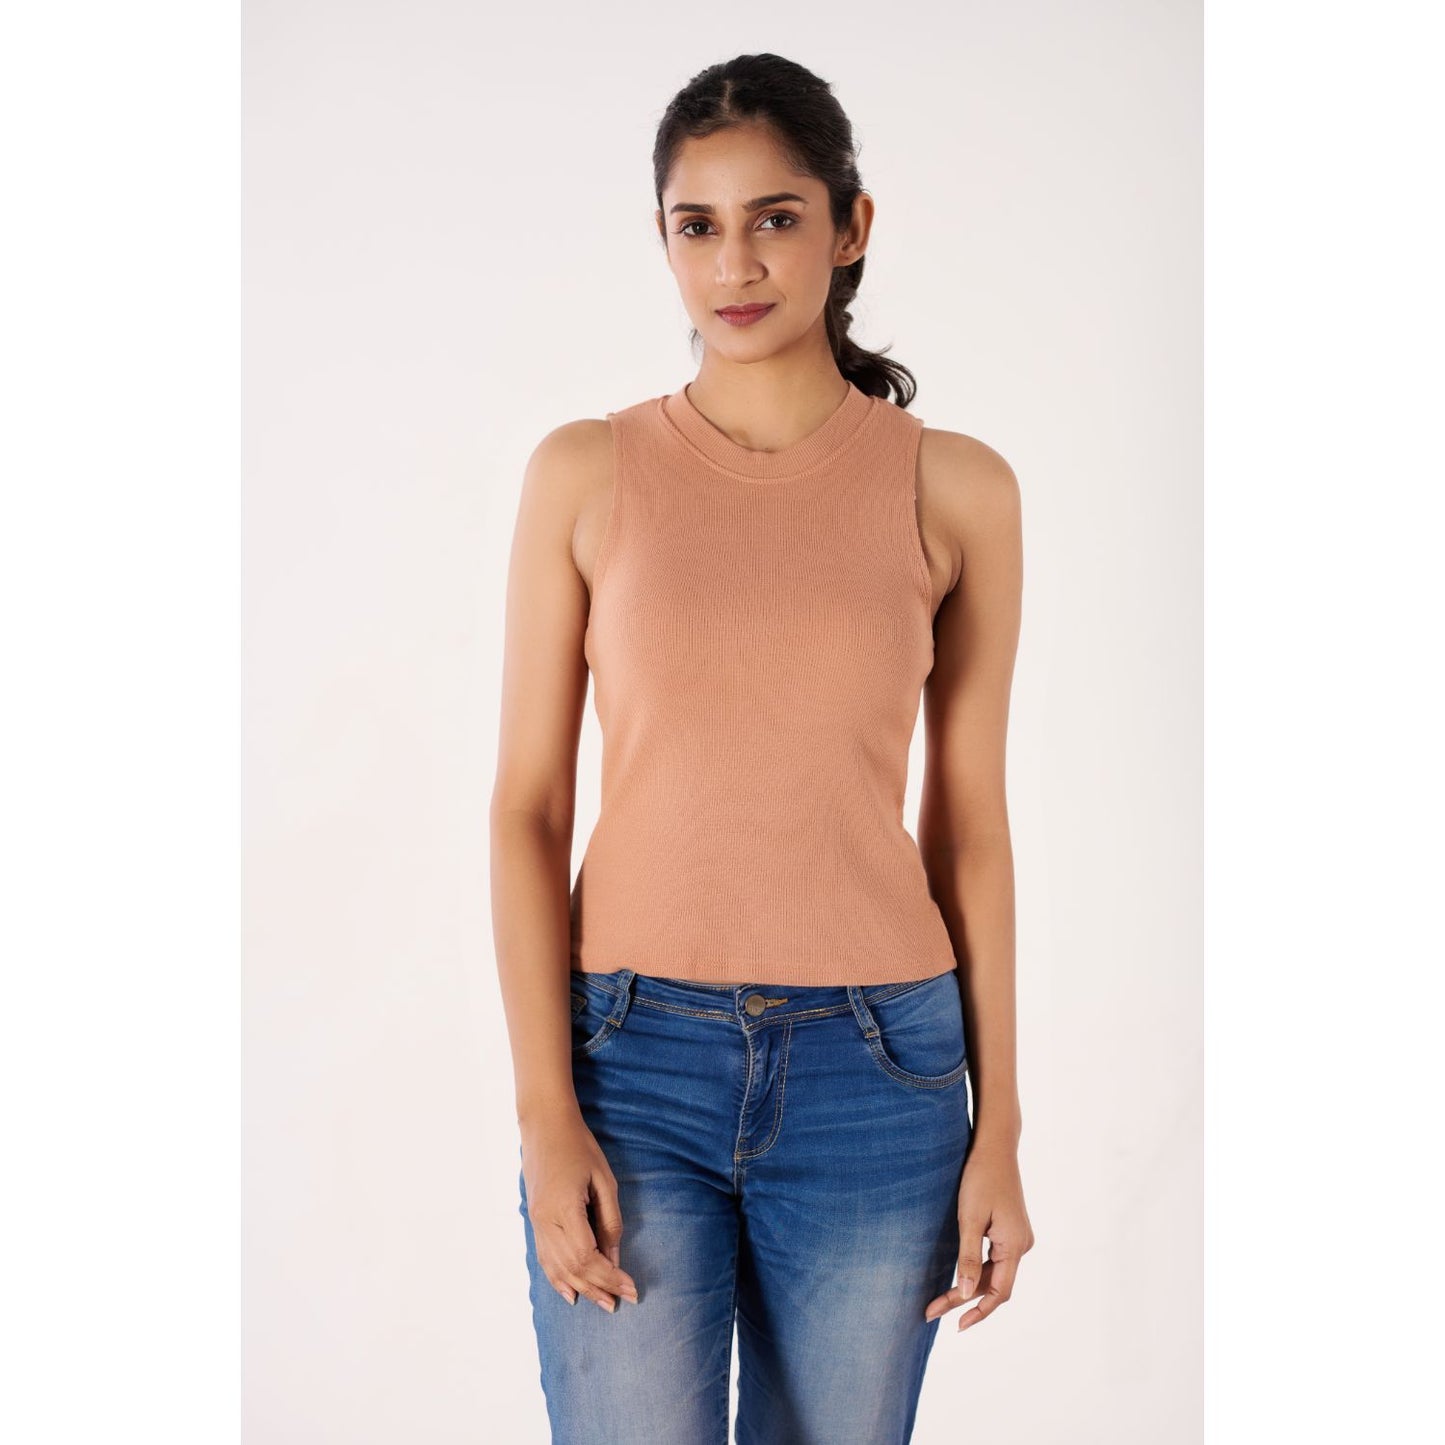 Sleeveless Hosiery Blouses - Cider - Blouse featured